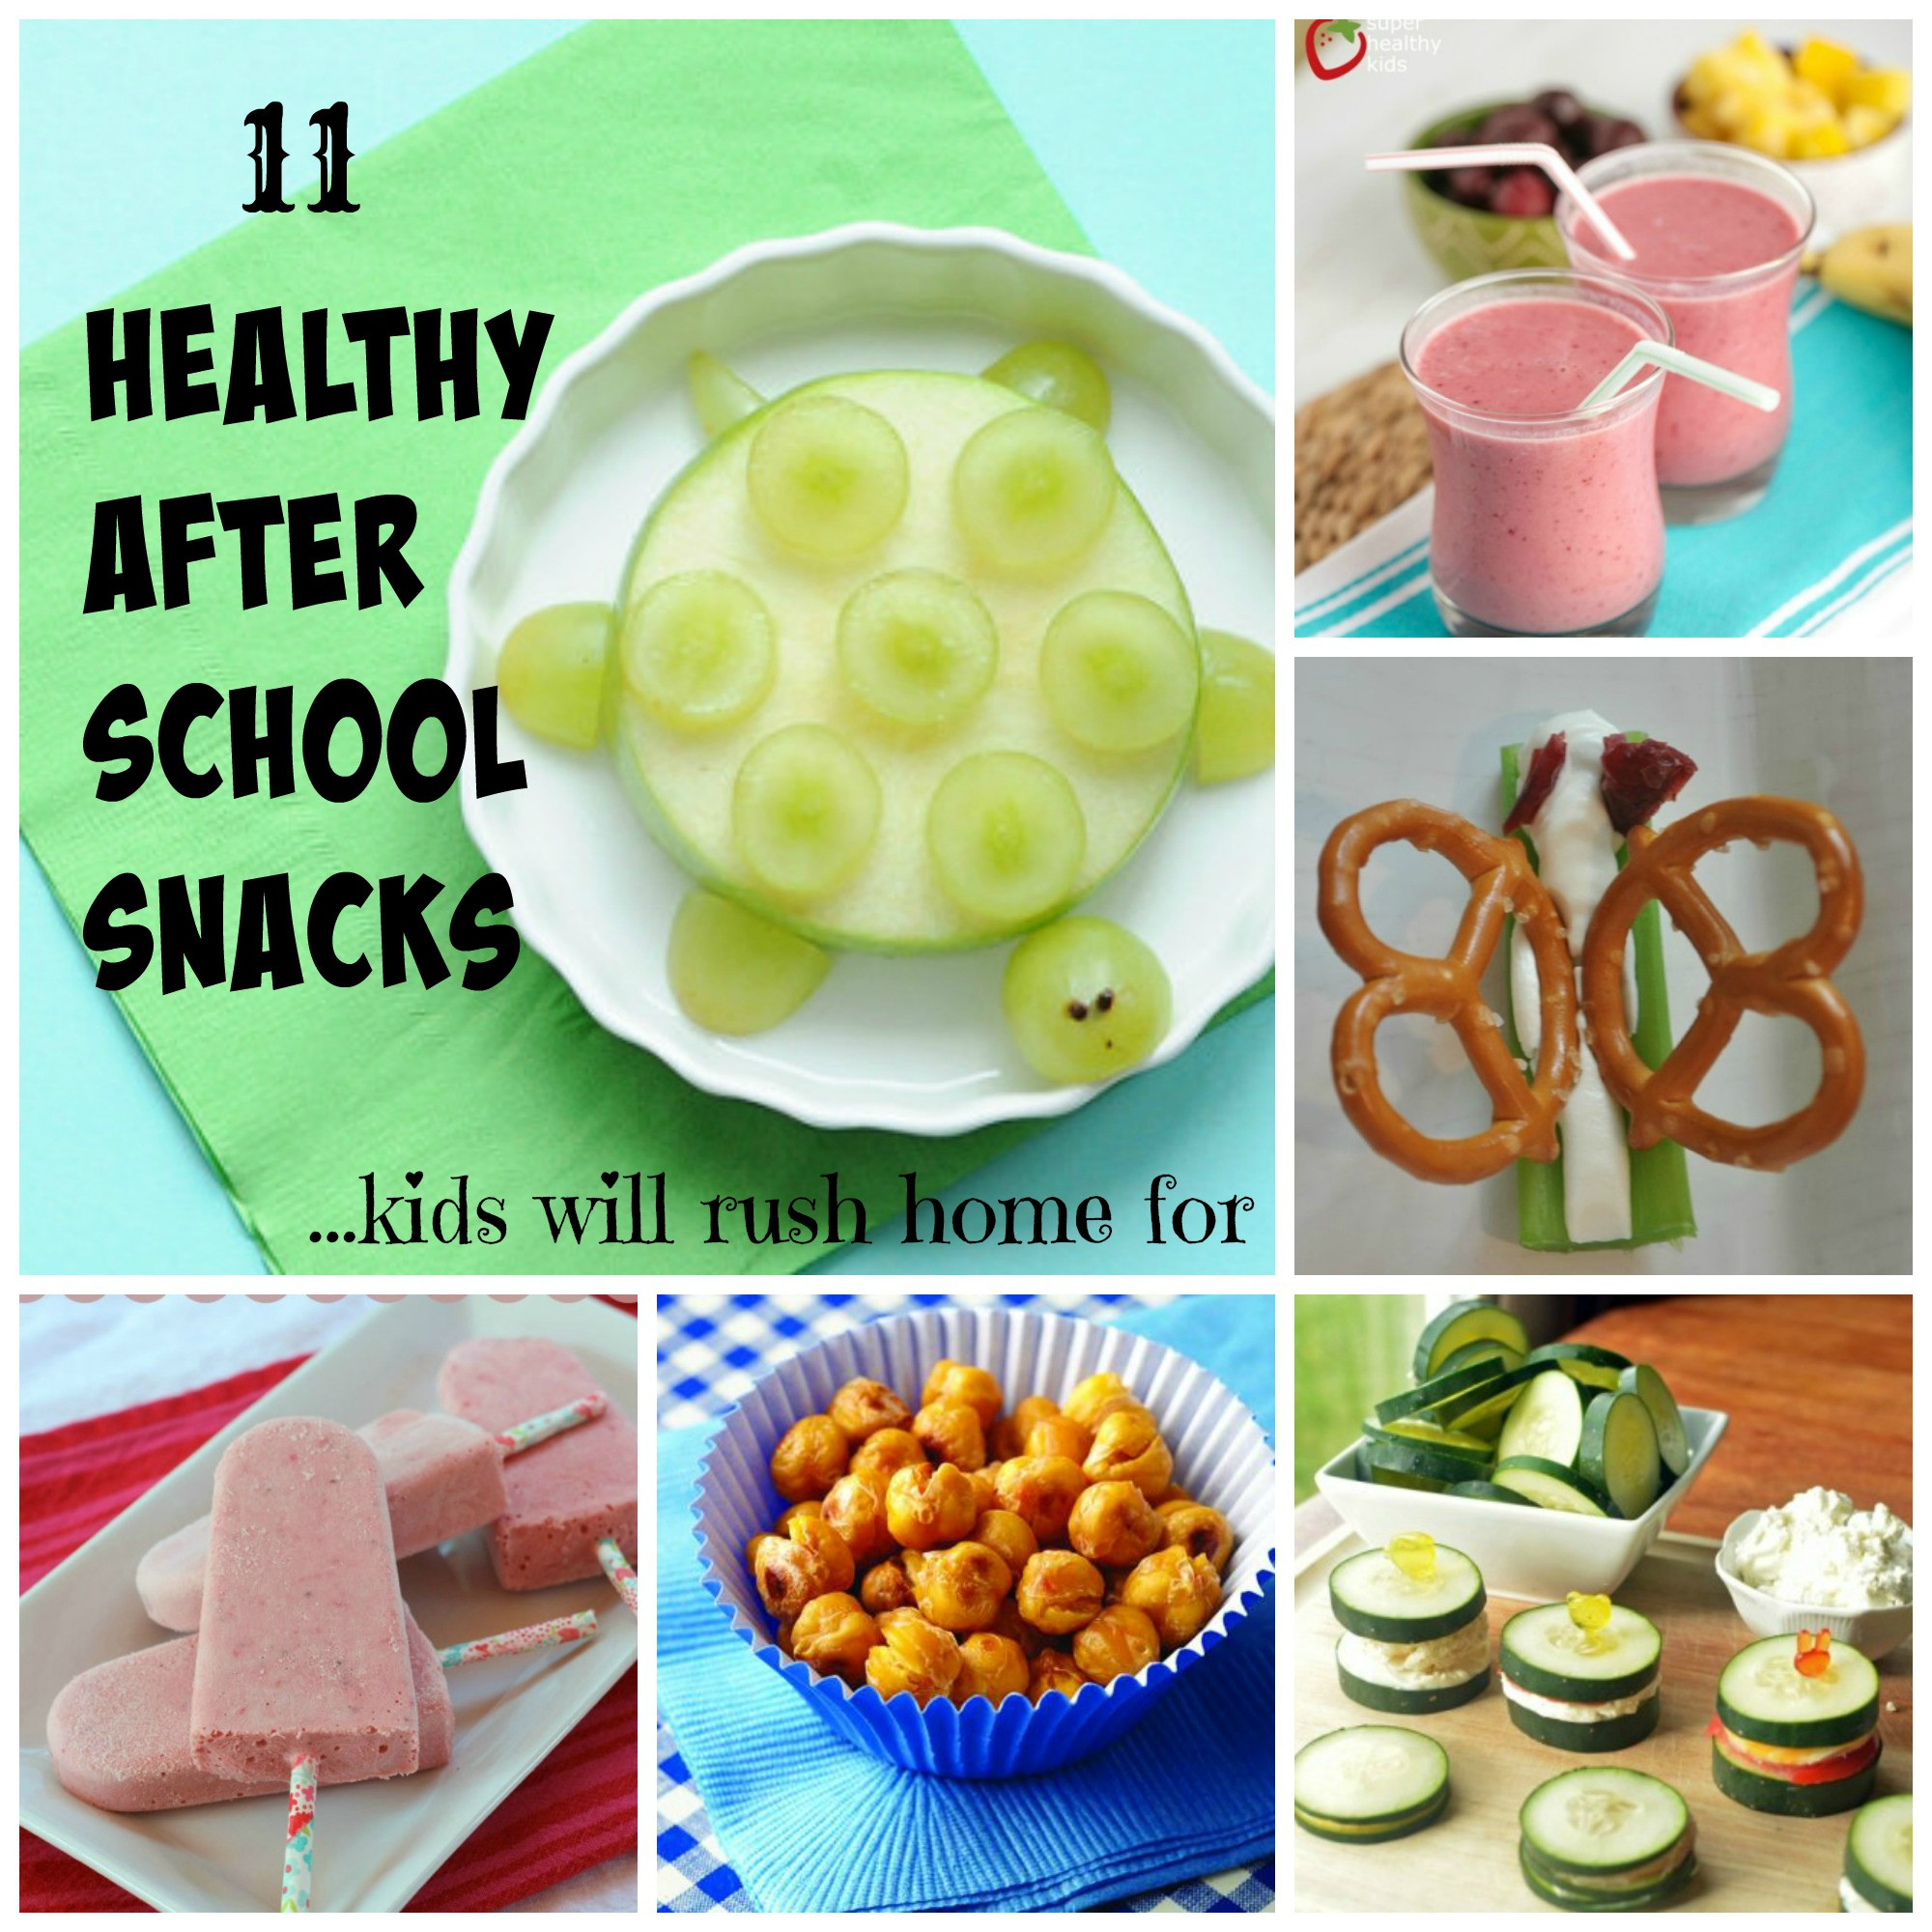 Healthy Snacks To Have At Home
 11 Healthy After School Snacks Kids Will Rush Home For